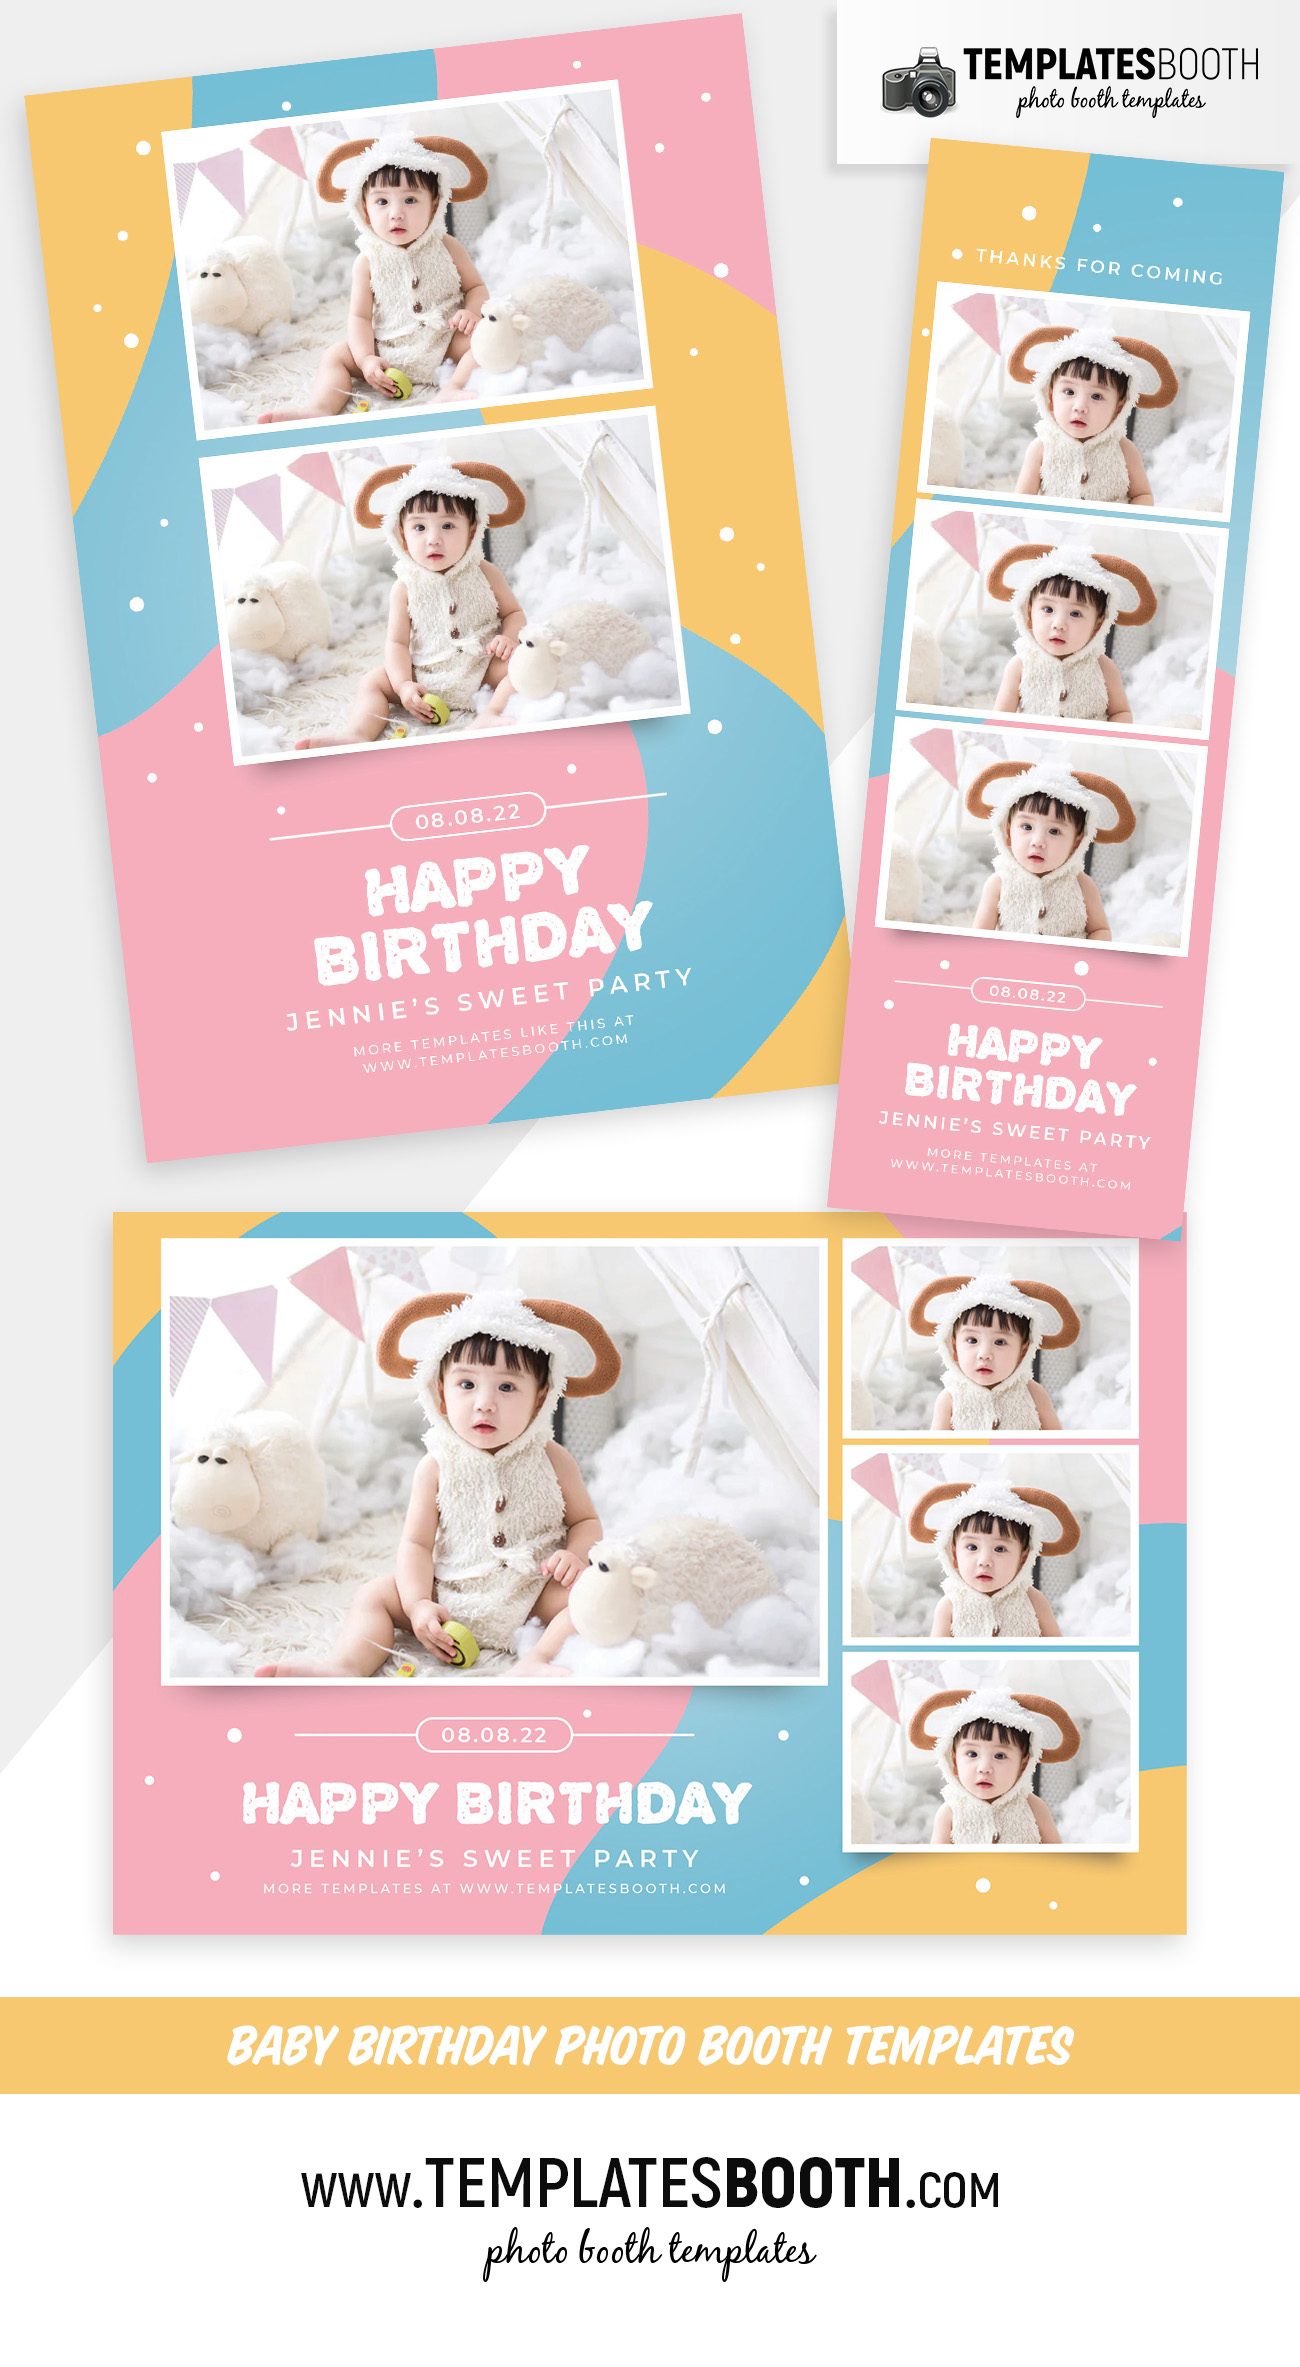 Baby Birthday Photo Booth Template